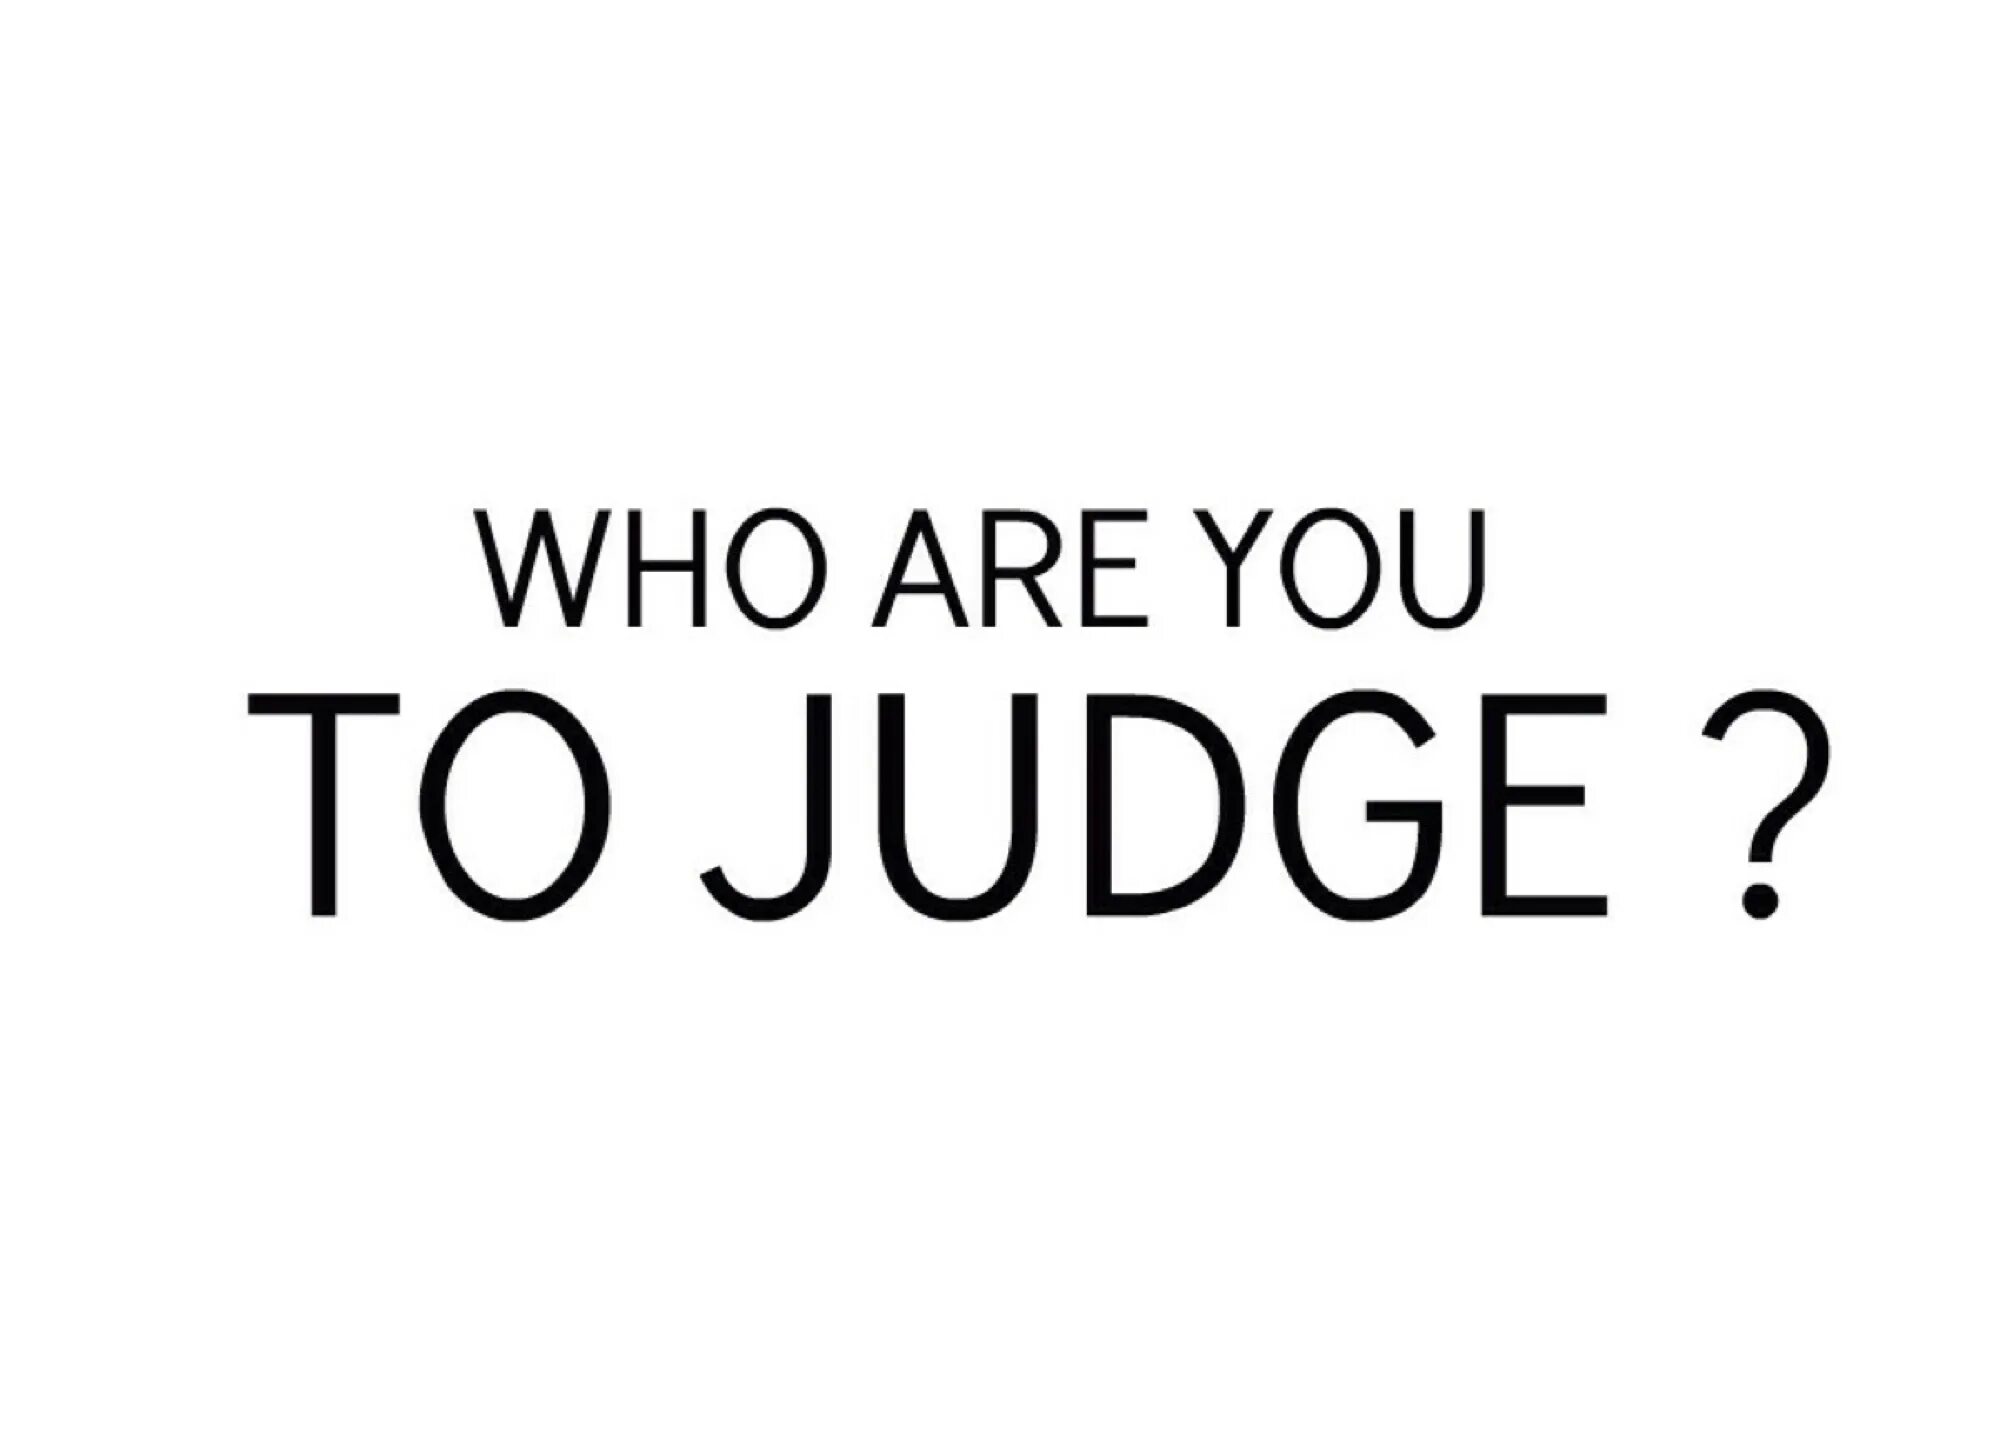 Who are you tests. Who are you. Who are you to judge. Are you who you are. Картинка who are you.